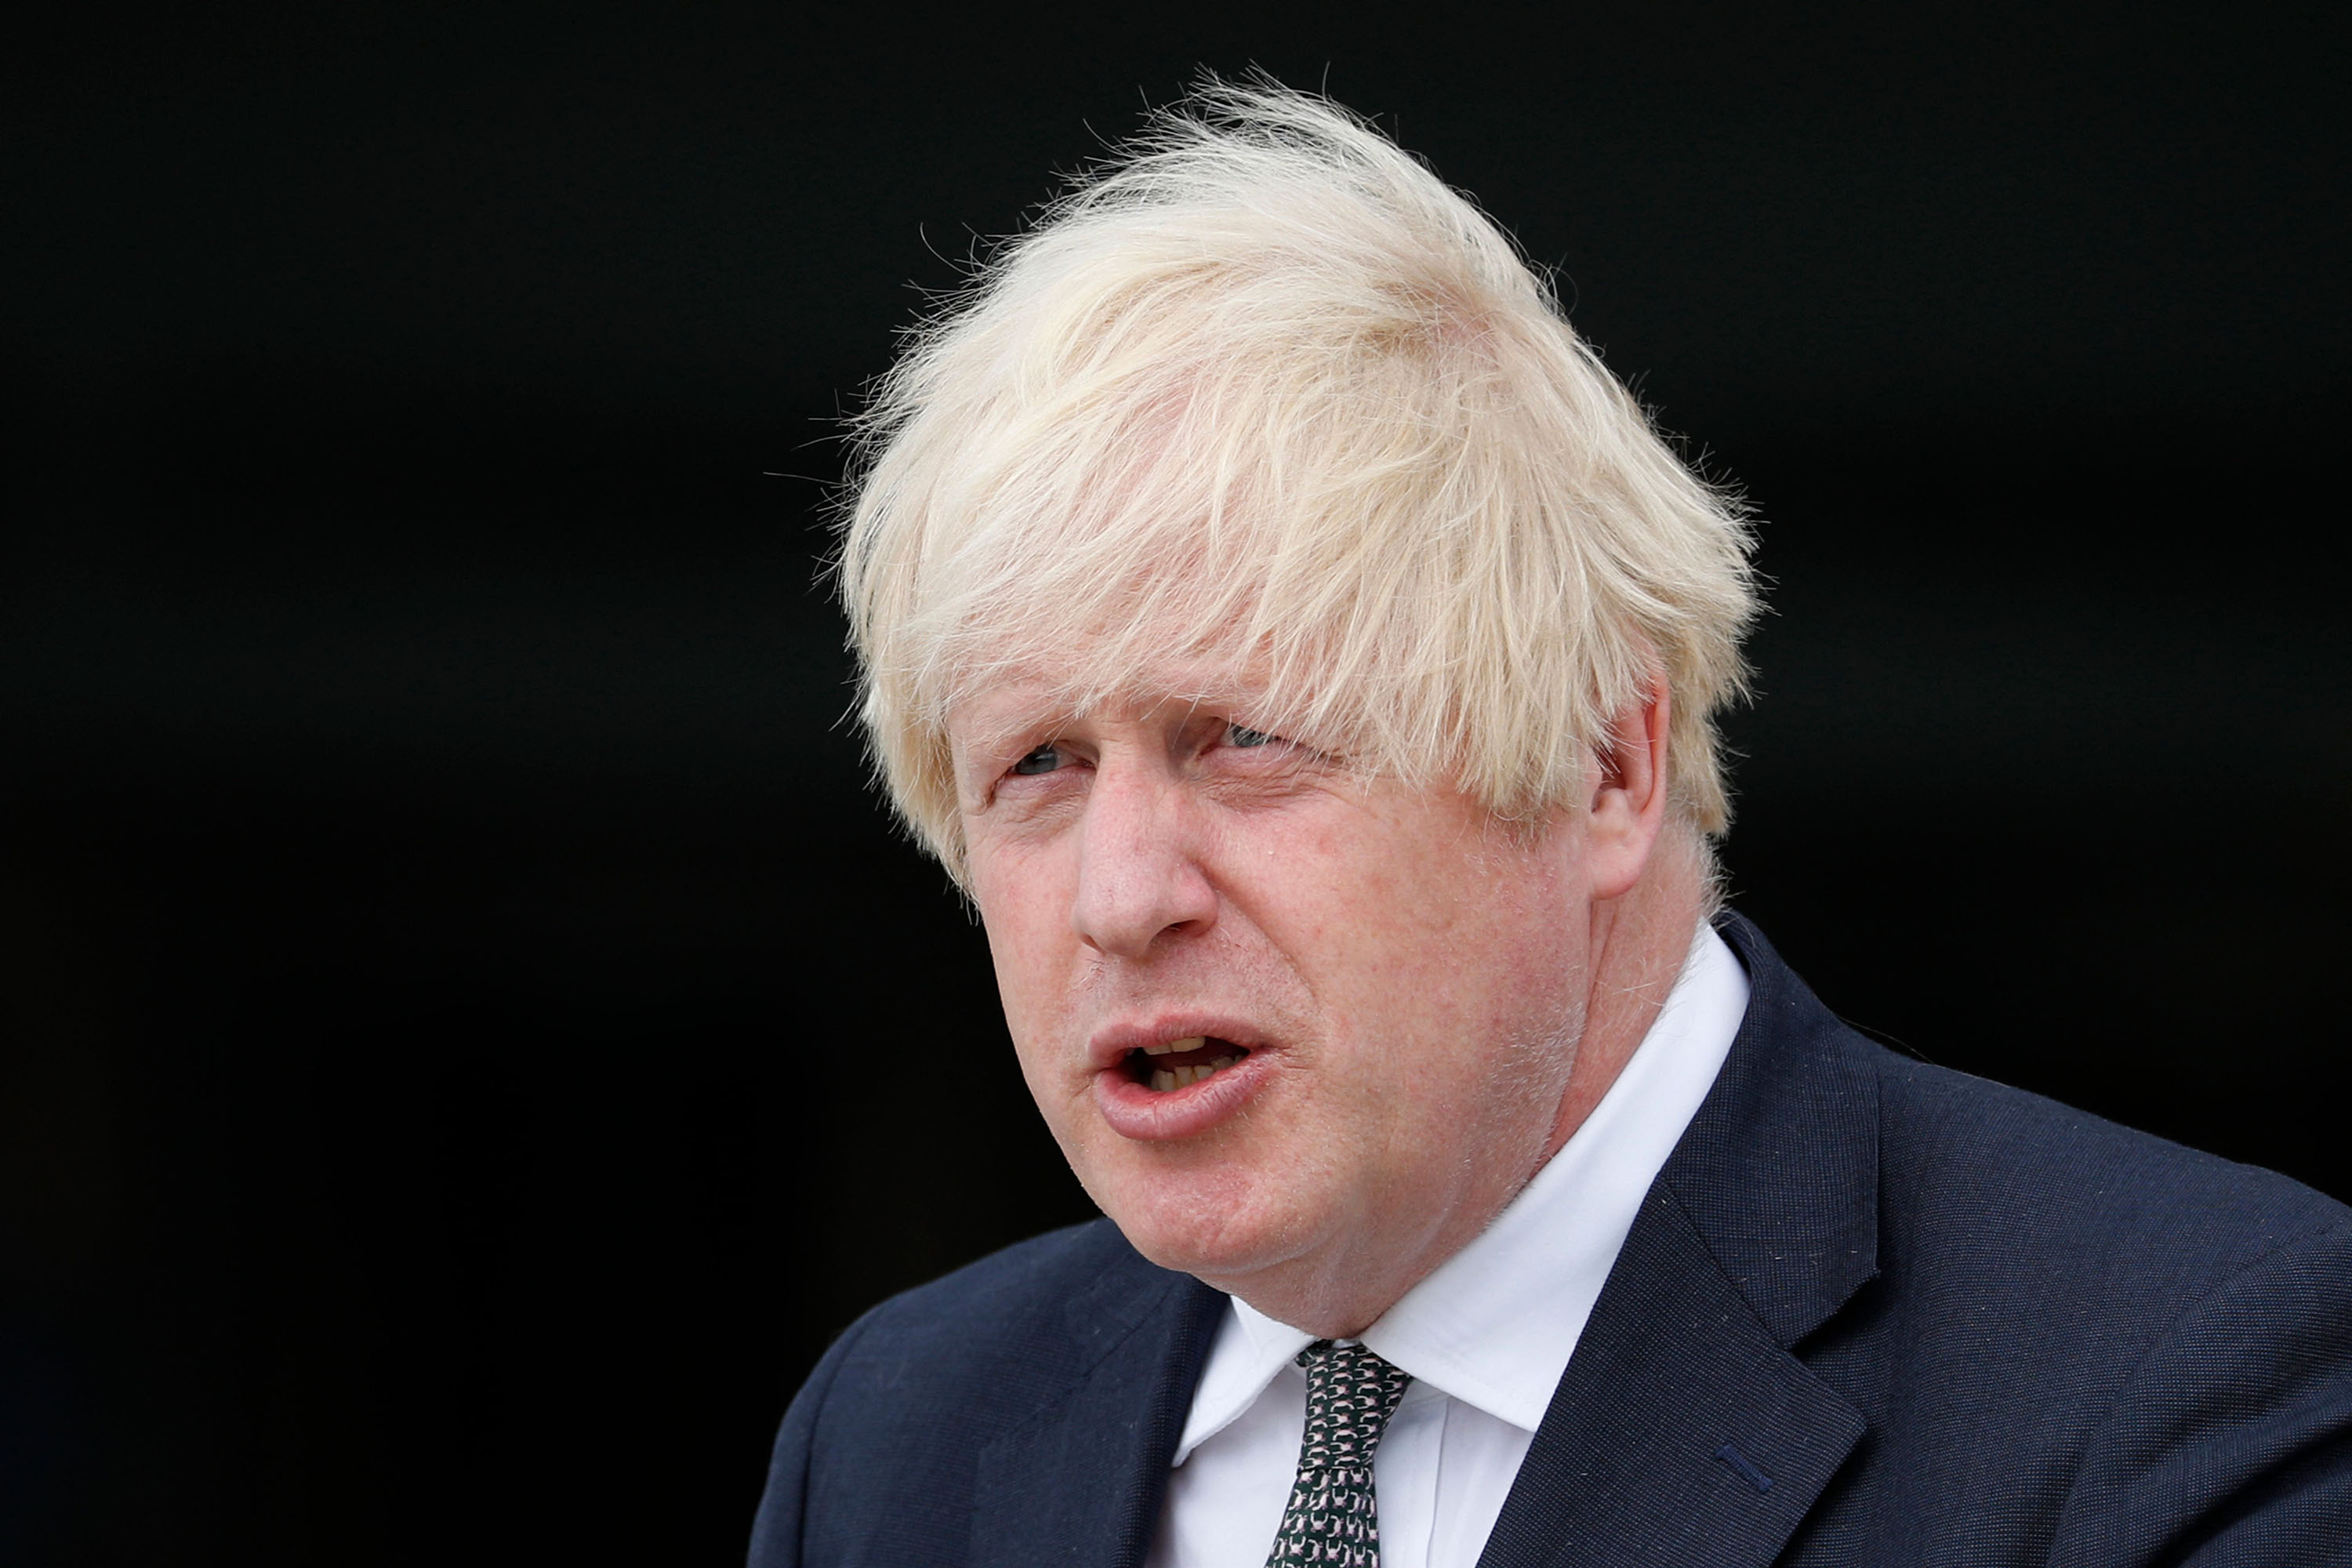 Britain's Prime Minister Boris Johnson is seen during a visit to Northwood Headquarters, the British Armed Forces Permanent Joint Headquarters, in Eastbury, England, on August 26. 